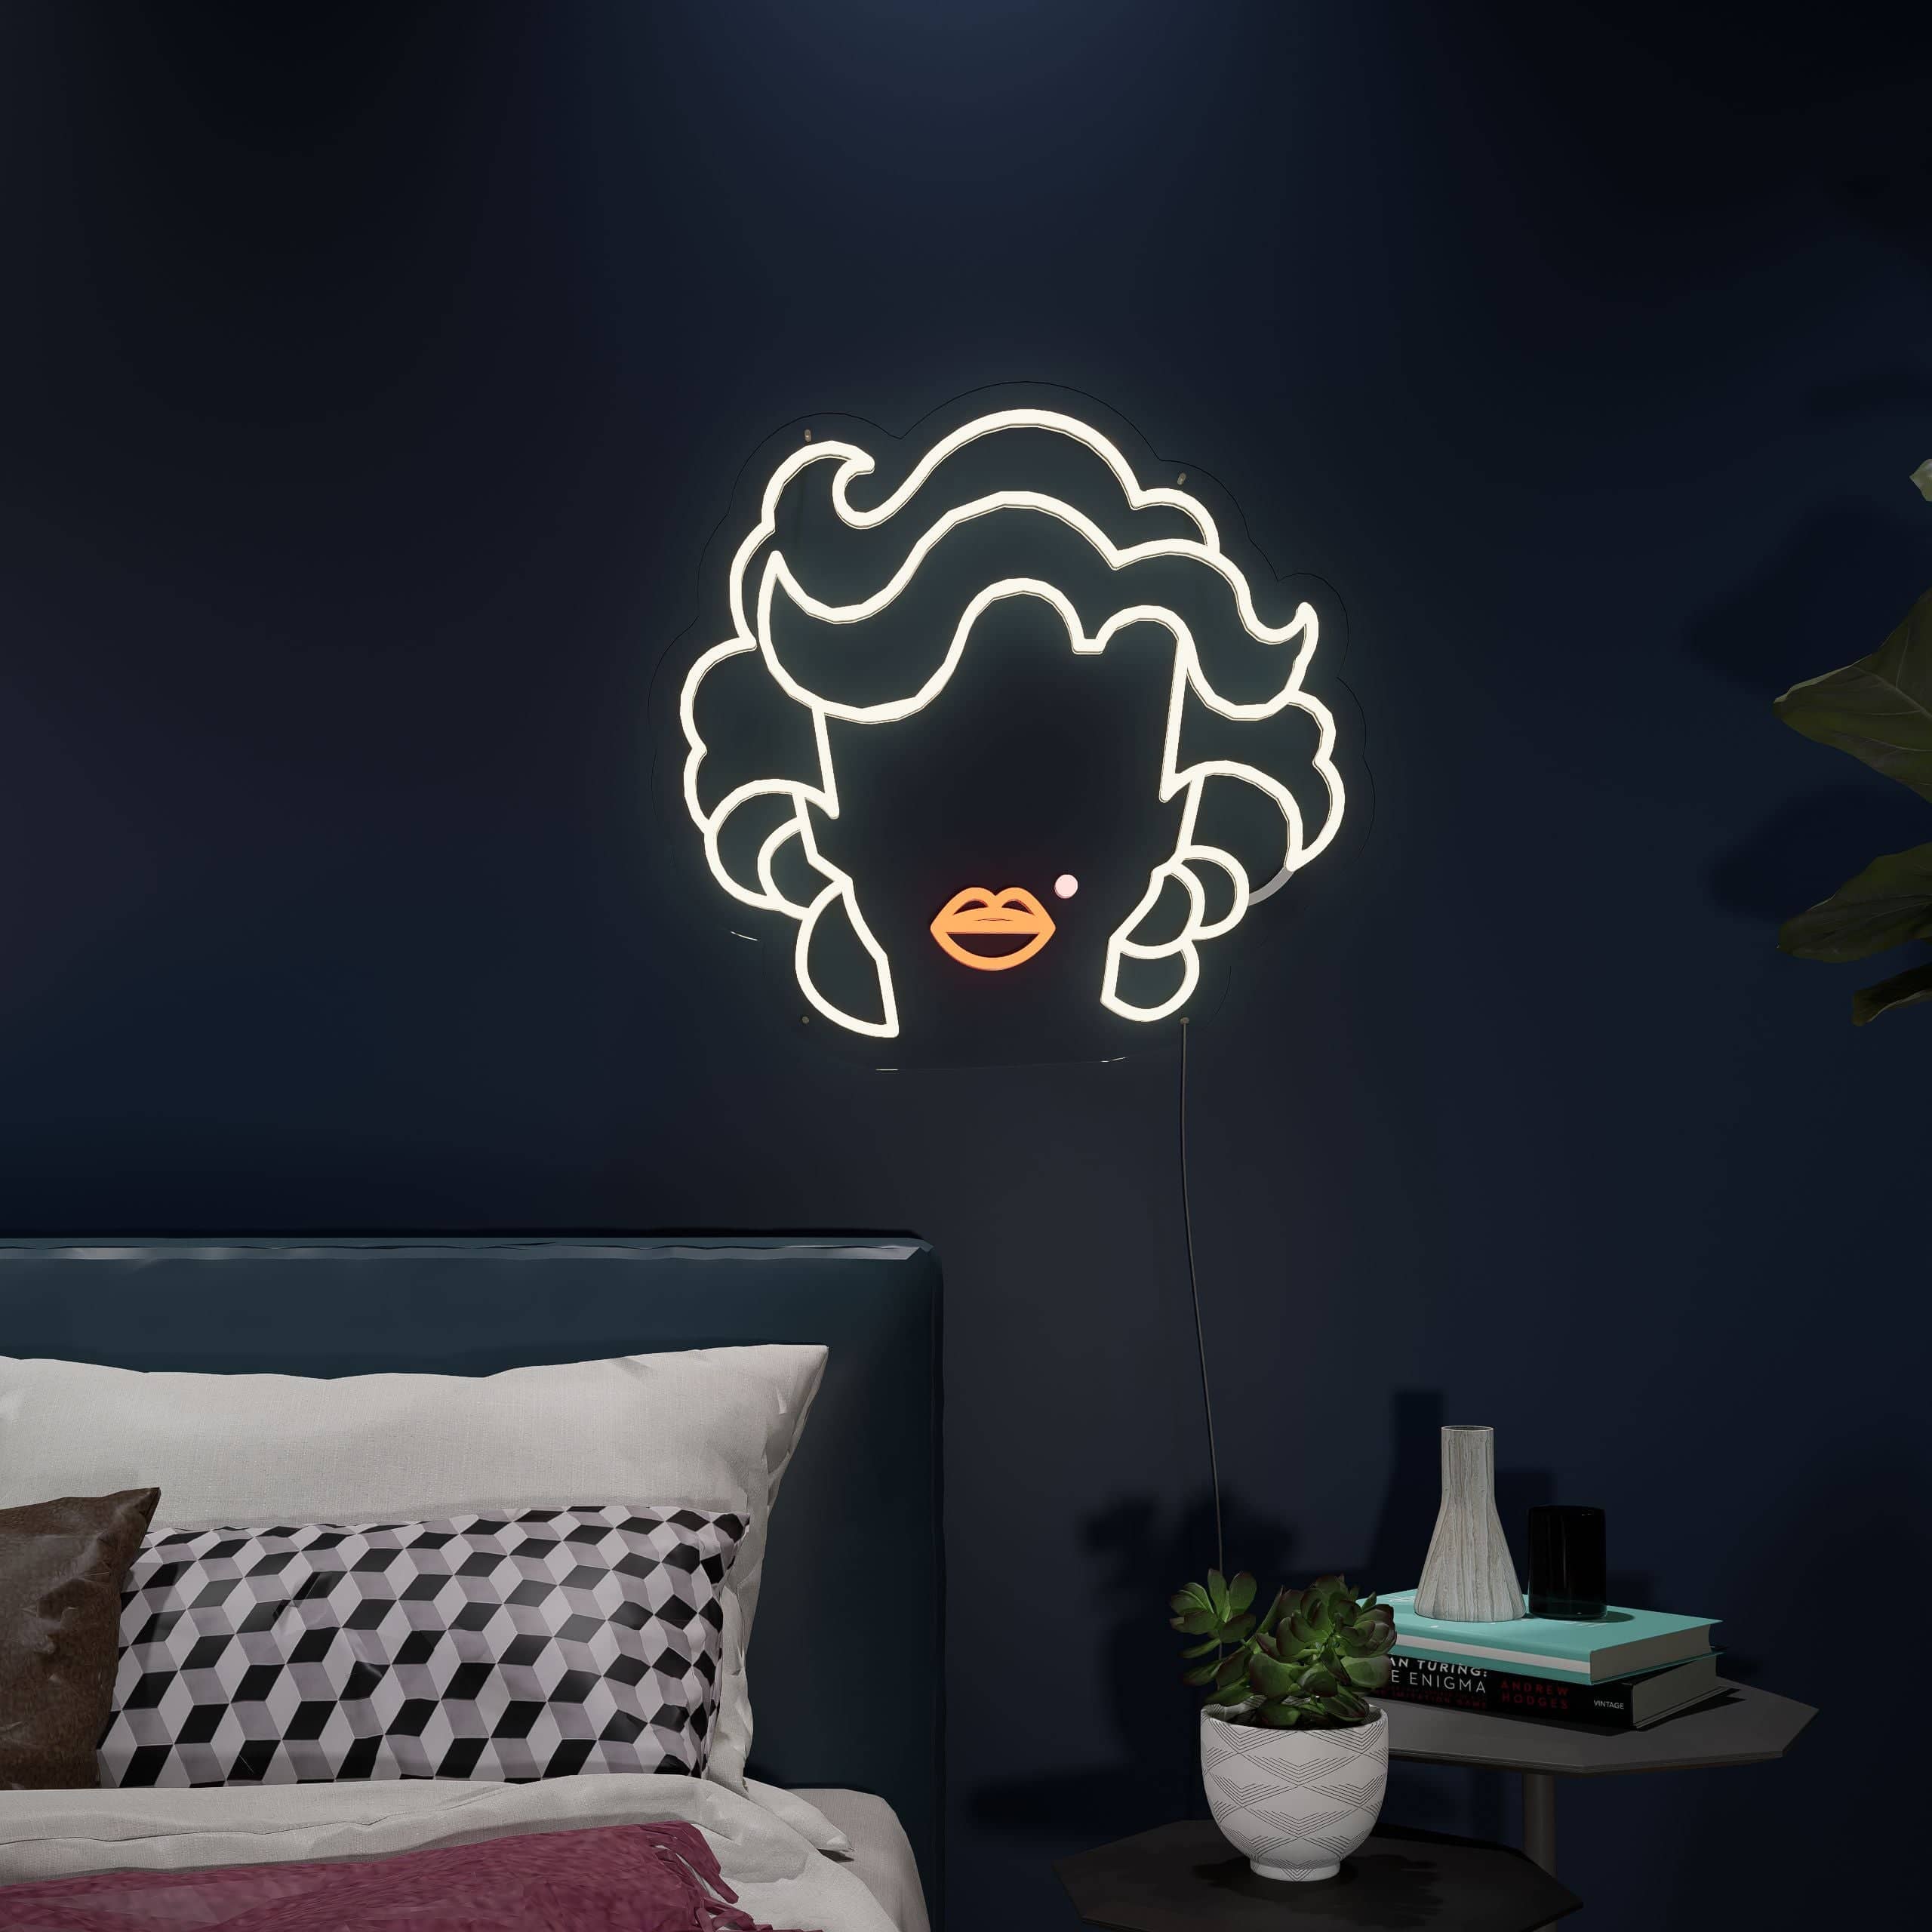 nstall Marilyn Neon to add warmth to spaces